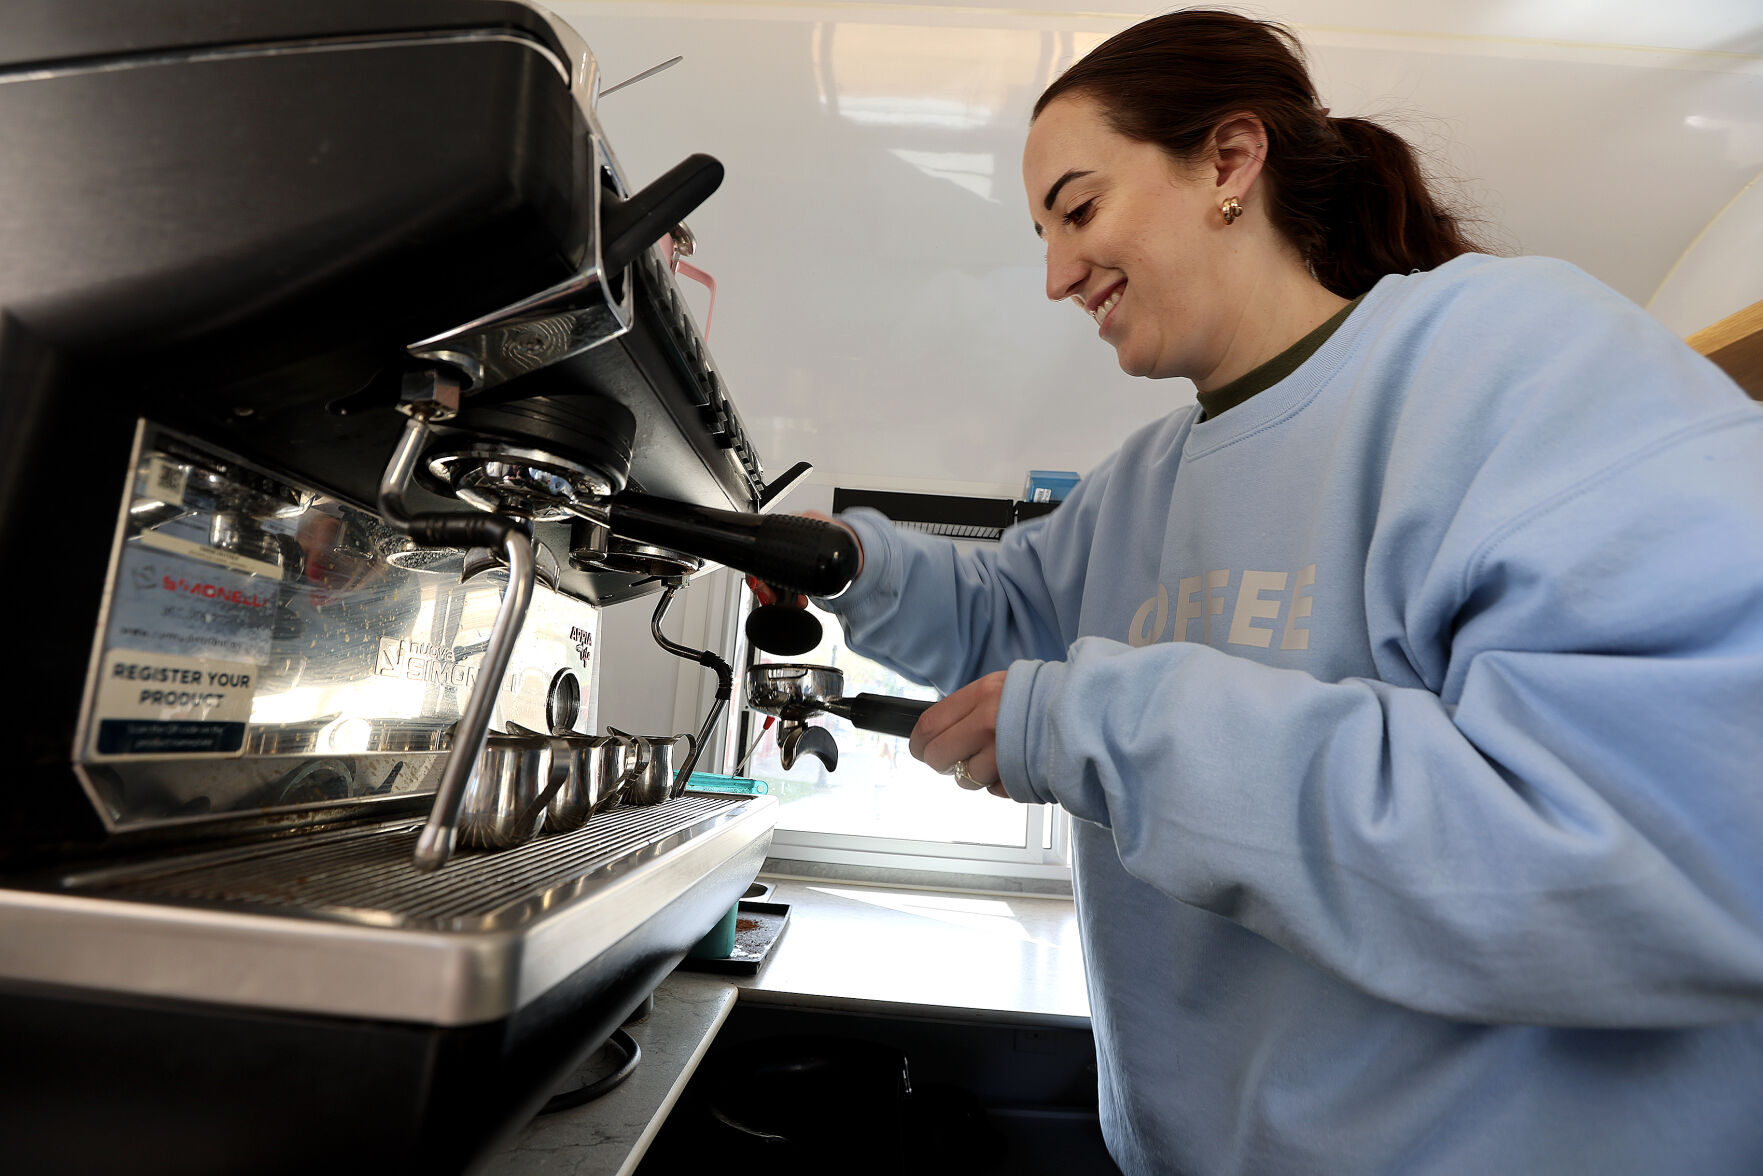 Sarah Knabel, owner of Bob & Lou’s, pulls shots of expresso for a coffee order.    PHOTO CREDIT: Dave Kettering